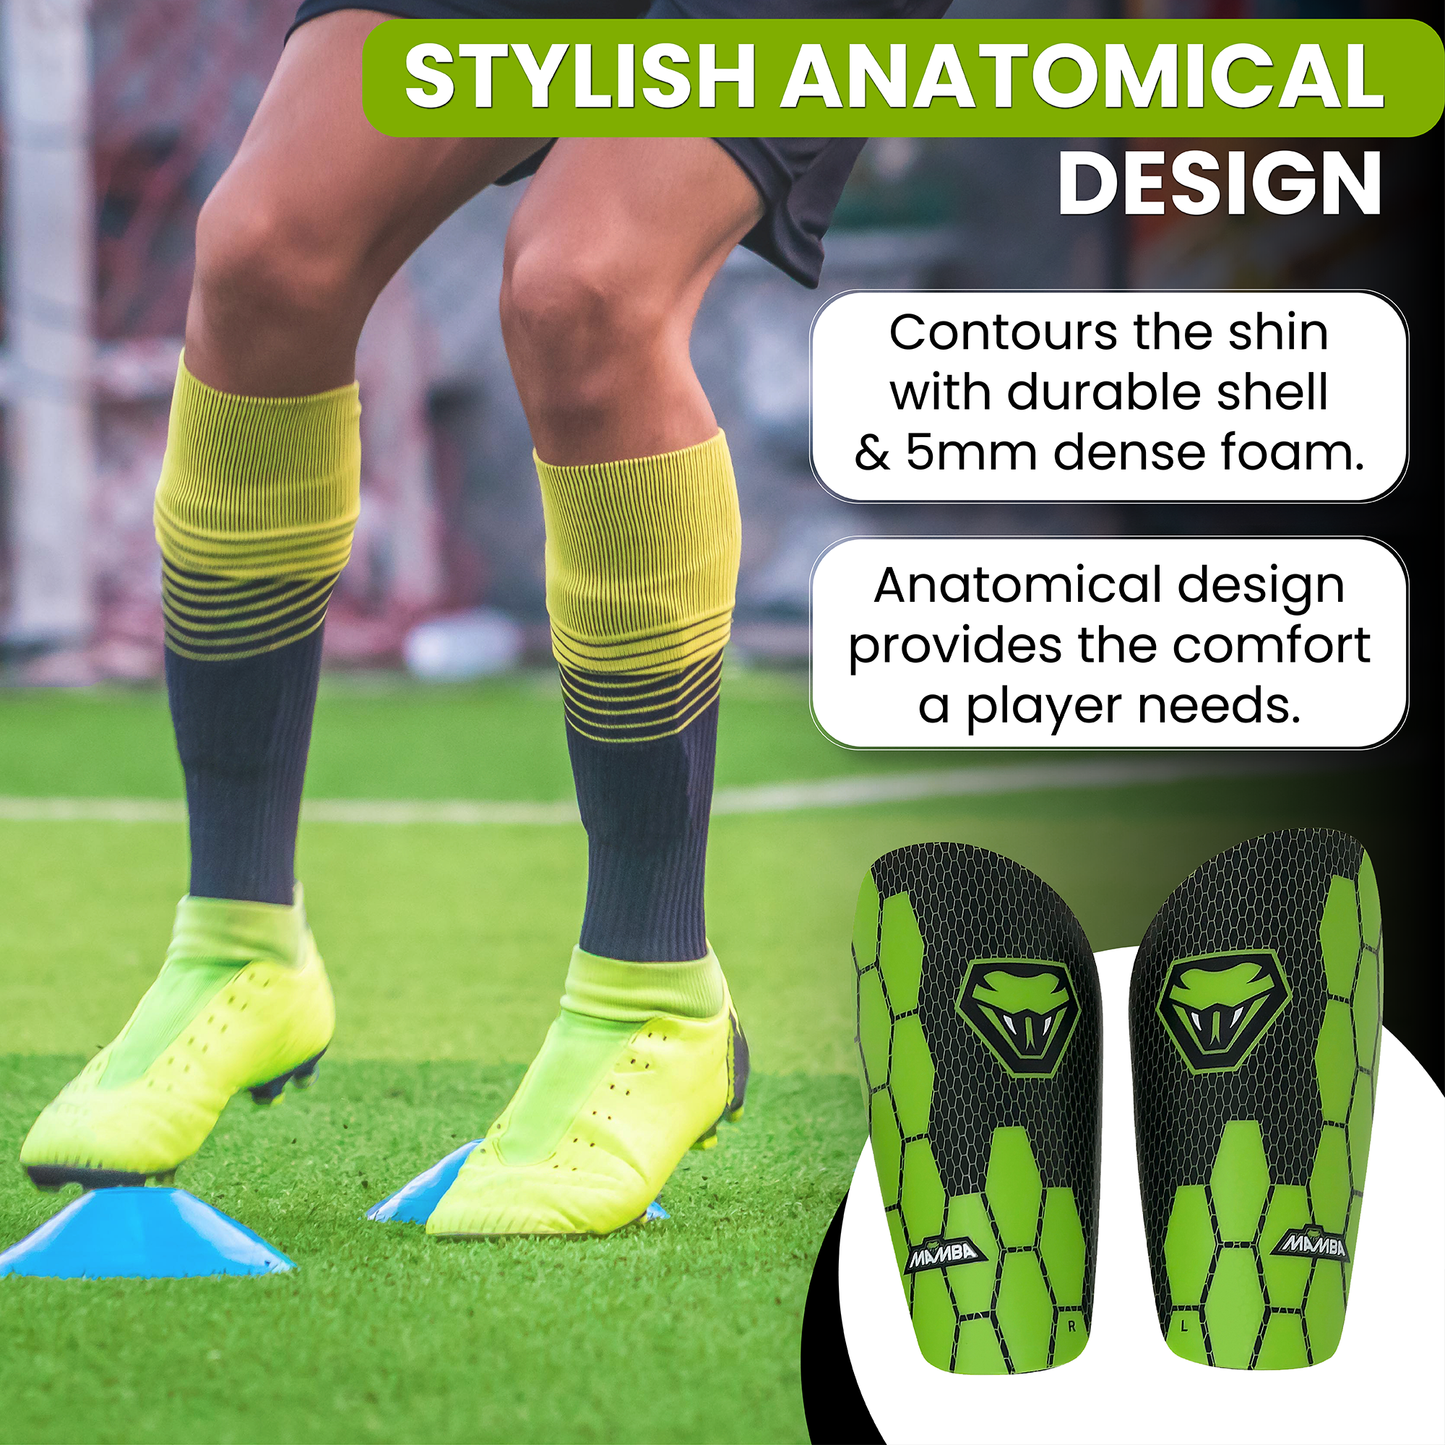 Shin pads anatomical design for comfort and protection